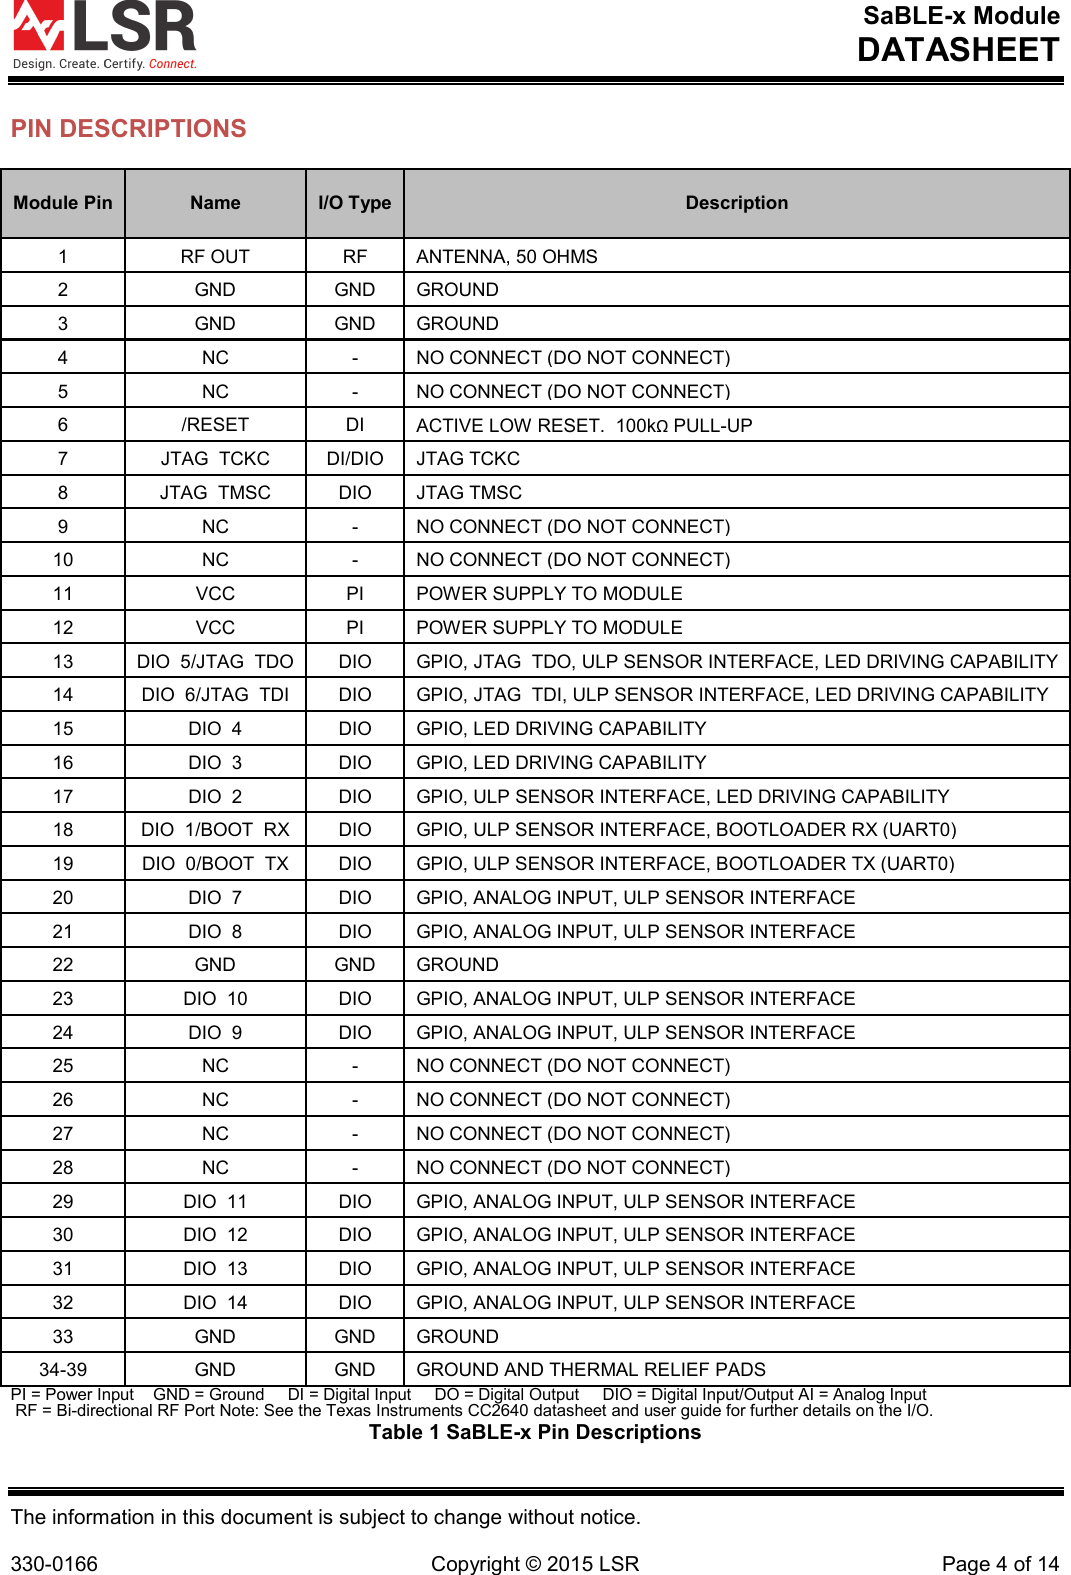 SaBLE-x Module DATASHEET  The information in this document is subject to change without notice.  330-0166 Copyright © 2015 LSR Page 4 of 14 PIN DESCRIPTIONS Module Pin Name I/O Type Description 1 RF OUT RF ANTENNA, 50 OHMS 2 GND GND GROUND 3 GND GND GROUND 4 NC - NO CONNECT (DO NOT CONNECT) 5 NC - NO CONNECT (DO NOT CONNECT) 6 /RESET DI ACTIVE LOW RESET.  100kΩ PULL-UP 7 JTAG TCKC DI/DIO JTAG TCKC 8 JTAG TMSC DIO JTAG TMSC 9 NC - NO CONNECT (DO NOT CONNECT) 10 NC - NO CONNECT (DO NOT CONNECT) 11 VCC PI POWER SUPPLY TO MODULE 12 VCC PI POWER SUPPLY TO MODULE 13 DIO 5/JTAG TDO DIO GPIO, JTAG TDO, ULP SENSOR INTERFACE, LED DRIVING CAPABILITY 14 DIO 6/JTAG TDI DIO GPIO, JTAG TDI, ULP SENSOR INTERFACE, LED DRIVING CAPABILITY 15 DIO 4 DIO GPIO, LED DRIVING CAPABILITY 16 DIO 3 DIO GPIO, LED DRIVING CAPABILITY 17 DIO 2 DIO GPIO, ULP SENSOR INTERFACE, LED DRIVING CAPABILITY 18 DIO 1/BOOT RX DIO GPIO, ULP SENSOR INTERFACE, BOOTLOADER RX (UART0) 19 DIO 0/BOOT TX DIO GPIO, ULP SENSOR INTERFACE, BOOTLOADER TX (UART0) 20 DIO 7 DIO GPIO, ANALOG INPUT, ULP SENSOR INTERFACE 21 DIO 8 DIO GPIO, ANALOG INPUT, ULP SENSOR INTERFACE 22 GND GND GROUND 23 DIO 10 DIO GPIO, ANALOG INPUT, ULP SENSOR INTERFACE 24 DIO 9 DIO GPIO, ANALOG INPUT, ULP SENSOR INTERFACE 25 NC - NO CONNECT (DO NOT CONNECT) 26 NC - NO CONNECT (DO NOT CONNECT) 27 NC - NO CONNECT (DO NOT CONNECT) 28 NC - NO CONNECT (DO NOT CONNECT) 29 DIO 11 DIO GPIO, ANALOG INPUT, ULP SENSOR INTERFACE 30 DIO 12 DIO GPIO, ANALOG INPUT, ULP SENSOR INTERFACE 31 DIO 13 DIO GPIO, ANALOG INPUT, ULP SENSOR INTERFACE 32 DIO 14 DIO GPIO, ANALOG INPUT, ULP SENSOR INTERFACE 33 GND GND GROUND 34-39 GND GND GROUND AND THERMAL RELIEF PADS PI = Power Input    GND = Ground     DI = Digital Input     DO = Digital Output     DIO = Digital Input/Output AI = Analog Input     RF = Bi-directional RF Port Note: See the Texas Instruments CC2640 datasheet and user guide for further details on the I/O. Table 1 SaBLE-x Pin Descriptions 